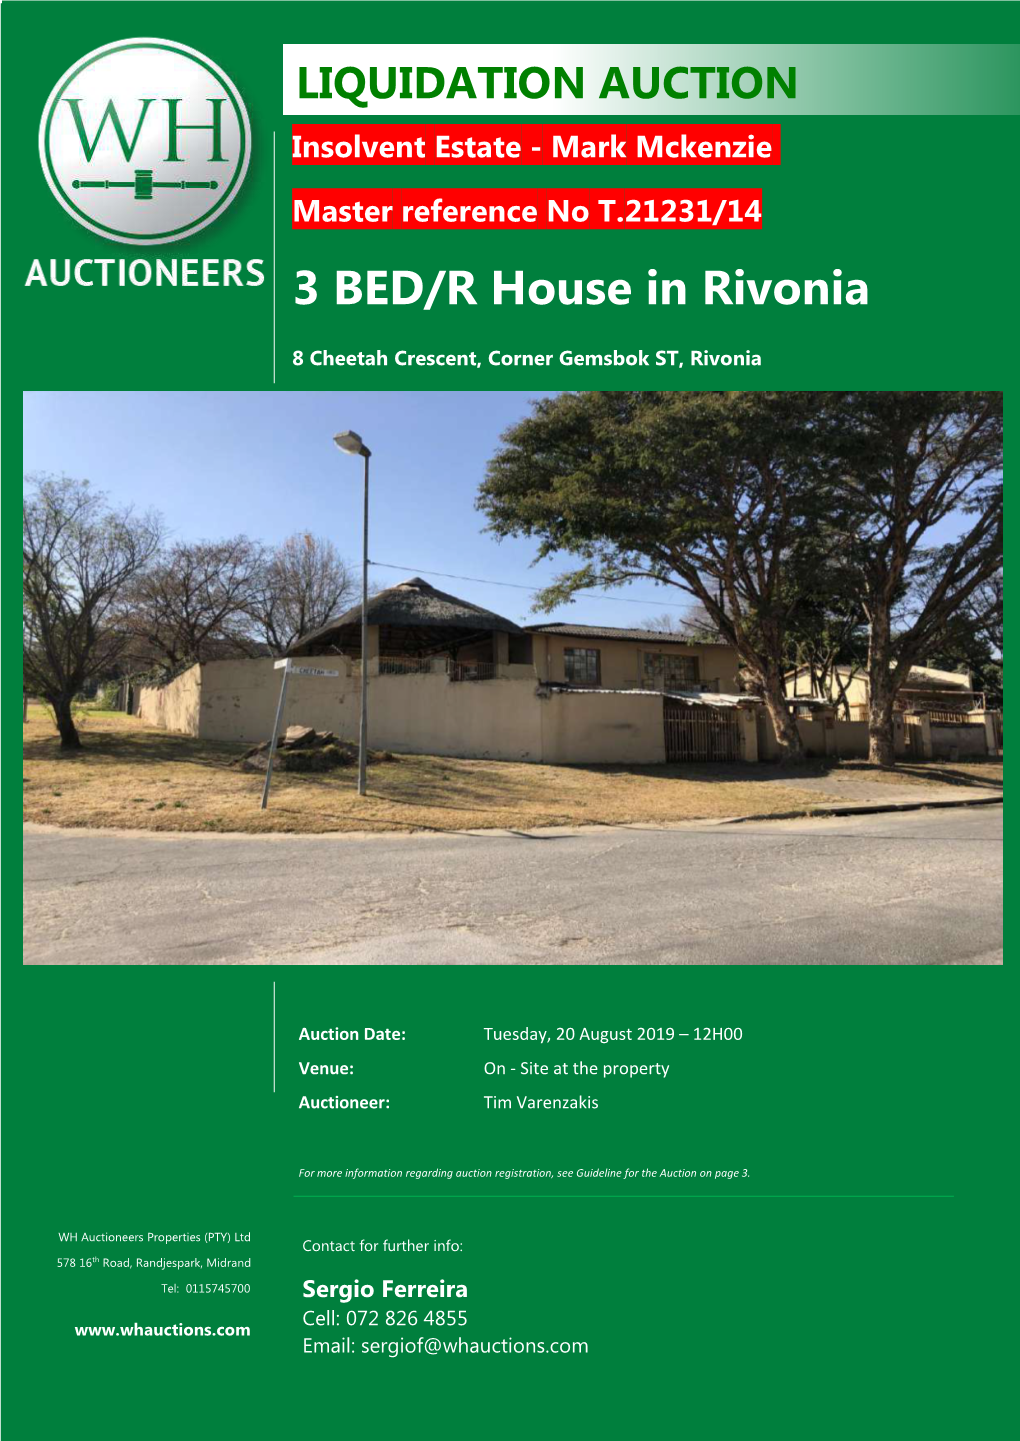 3 BED/R House in Rivonia